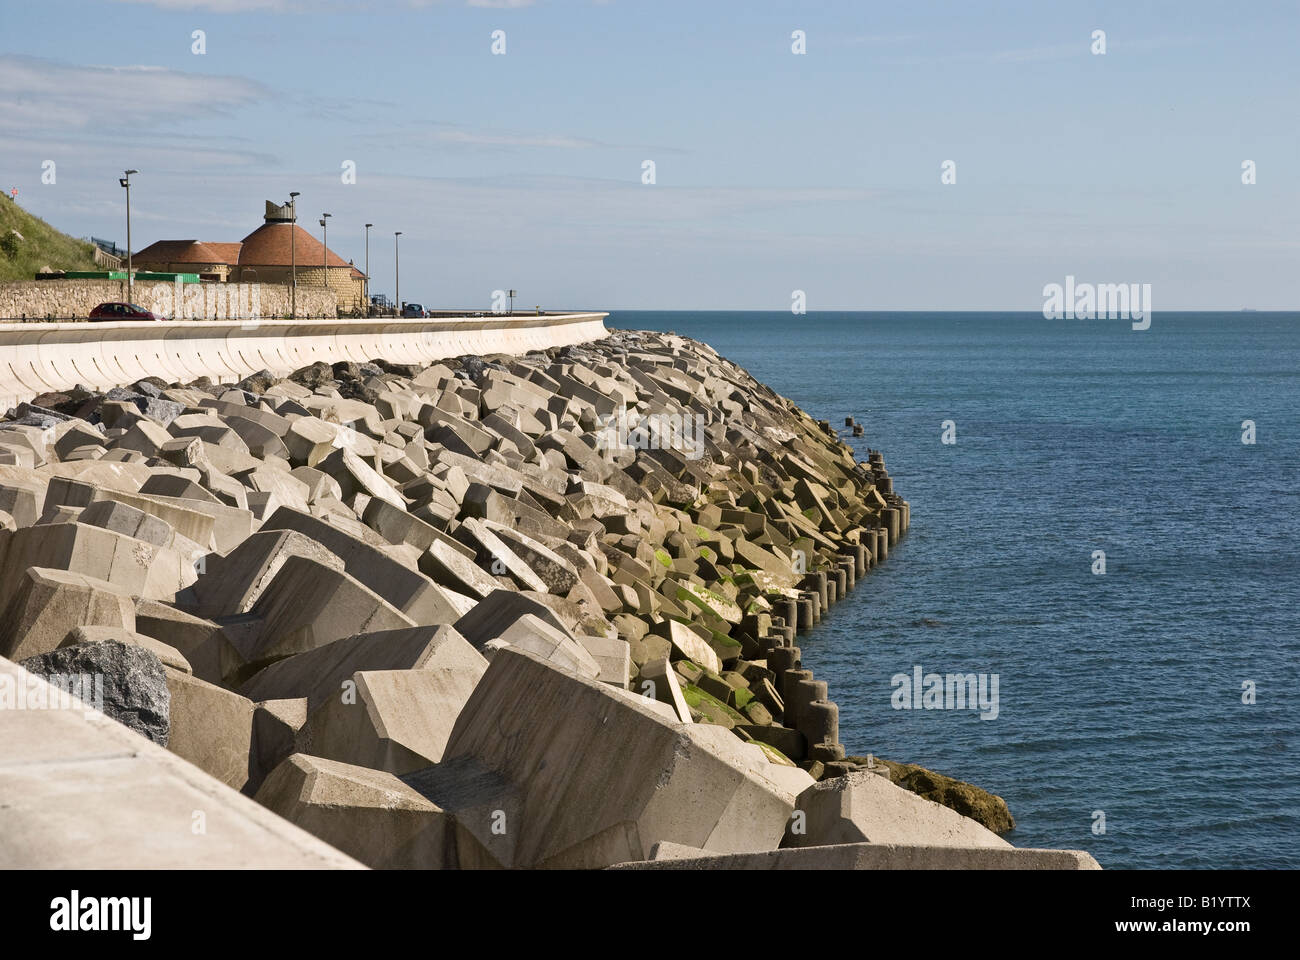 Rock armour and accropode coastal defences Marine Drive Scarborough Yorkshire UK Stock Photo